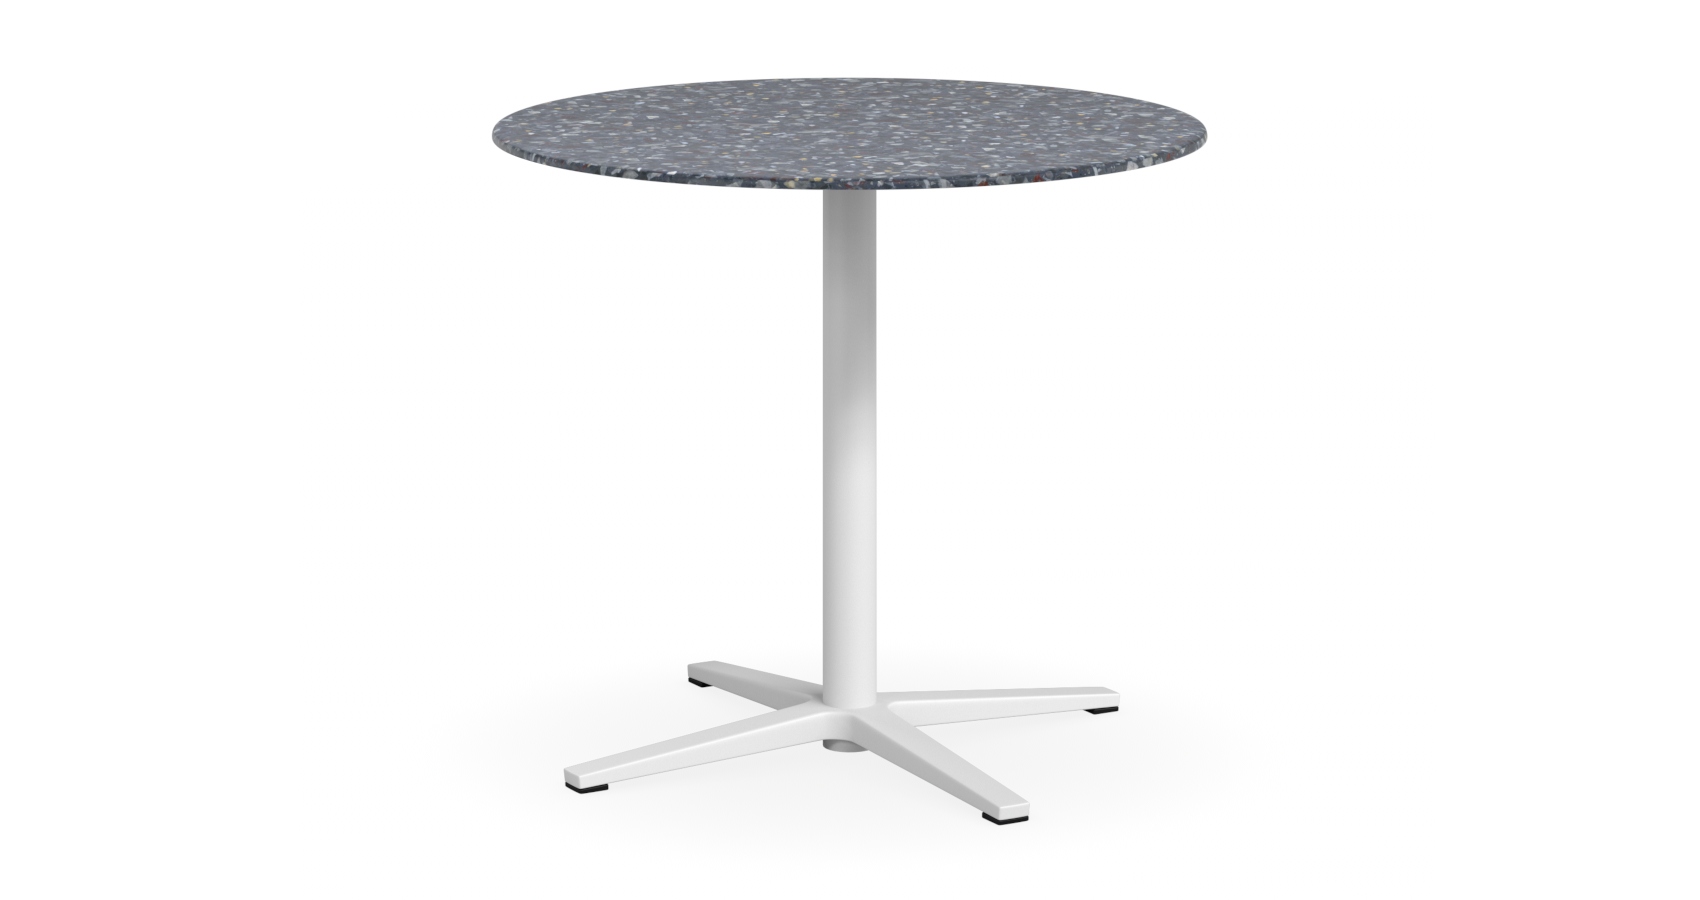 Wiz table with white base and round Neo Terrazzo top